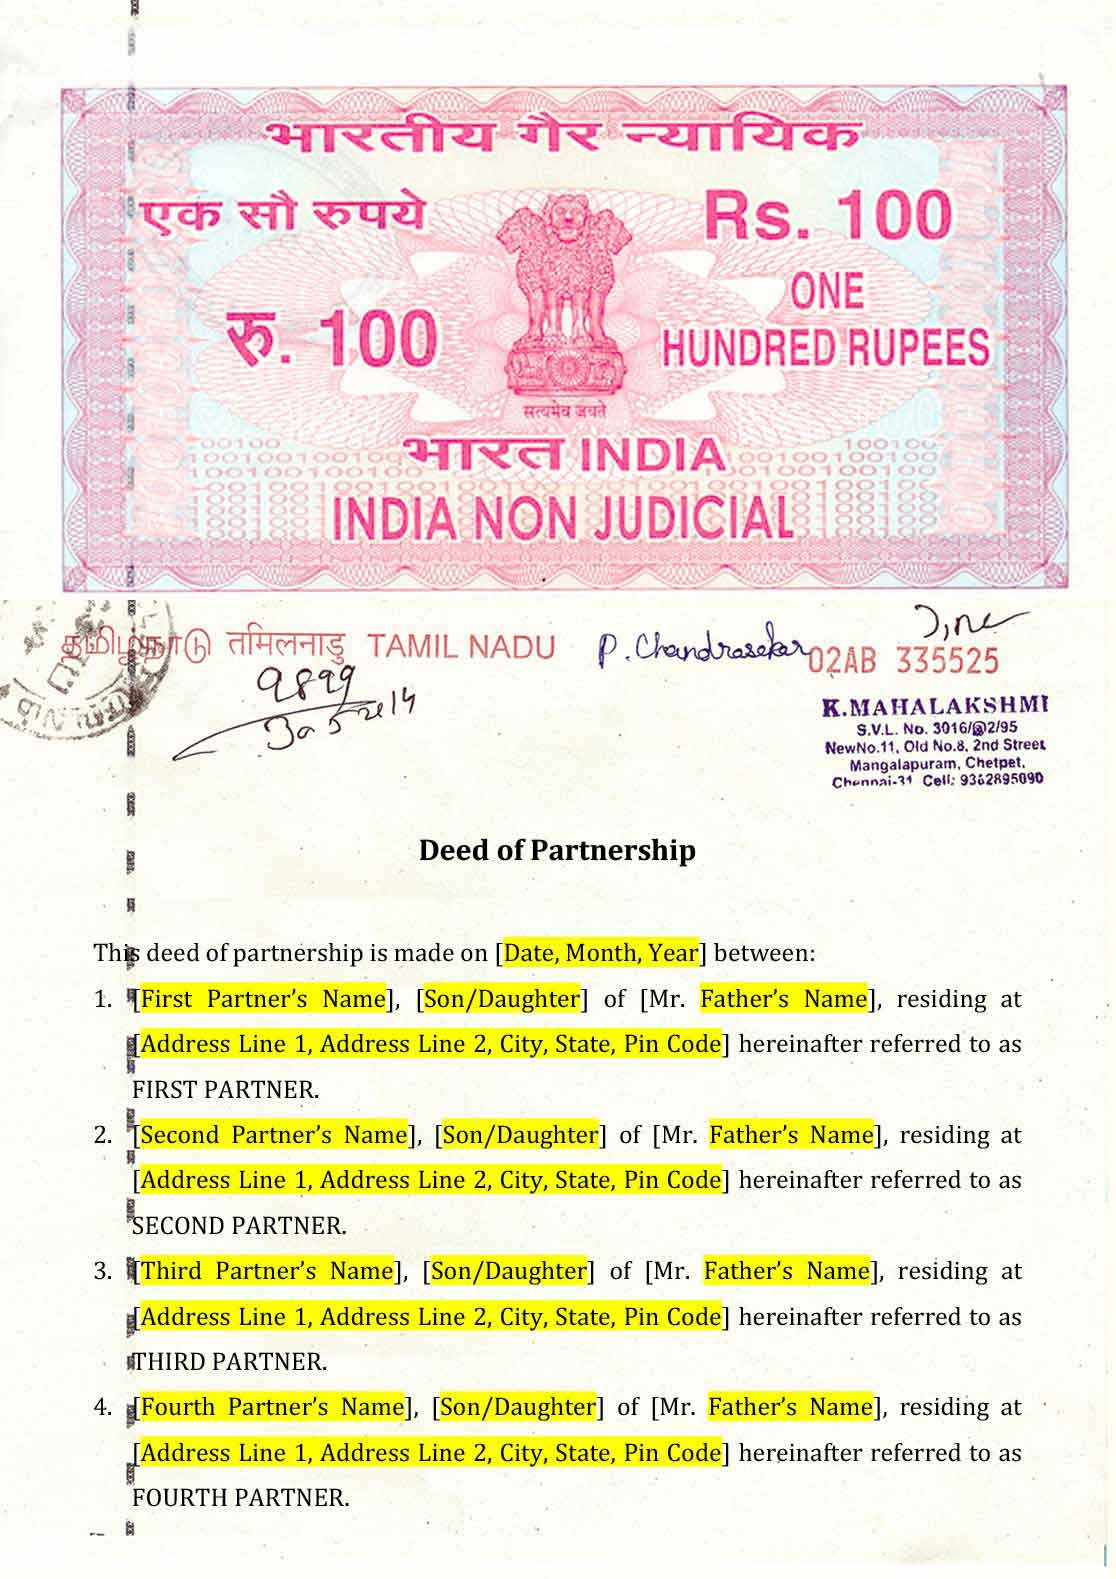 Business Partnership Agreement Between Two Companies Partnership Deed Format Indiafilings Document Center